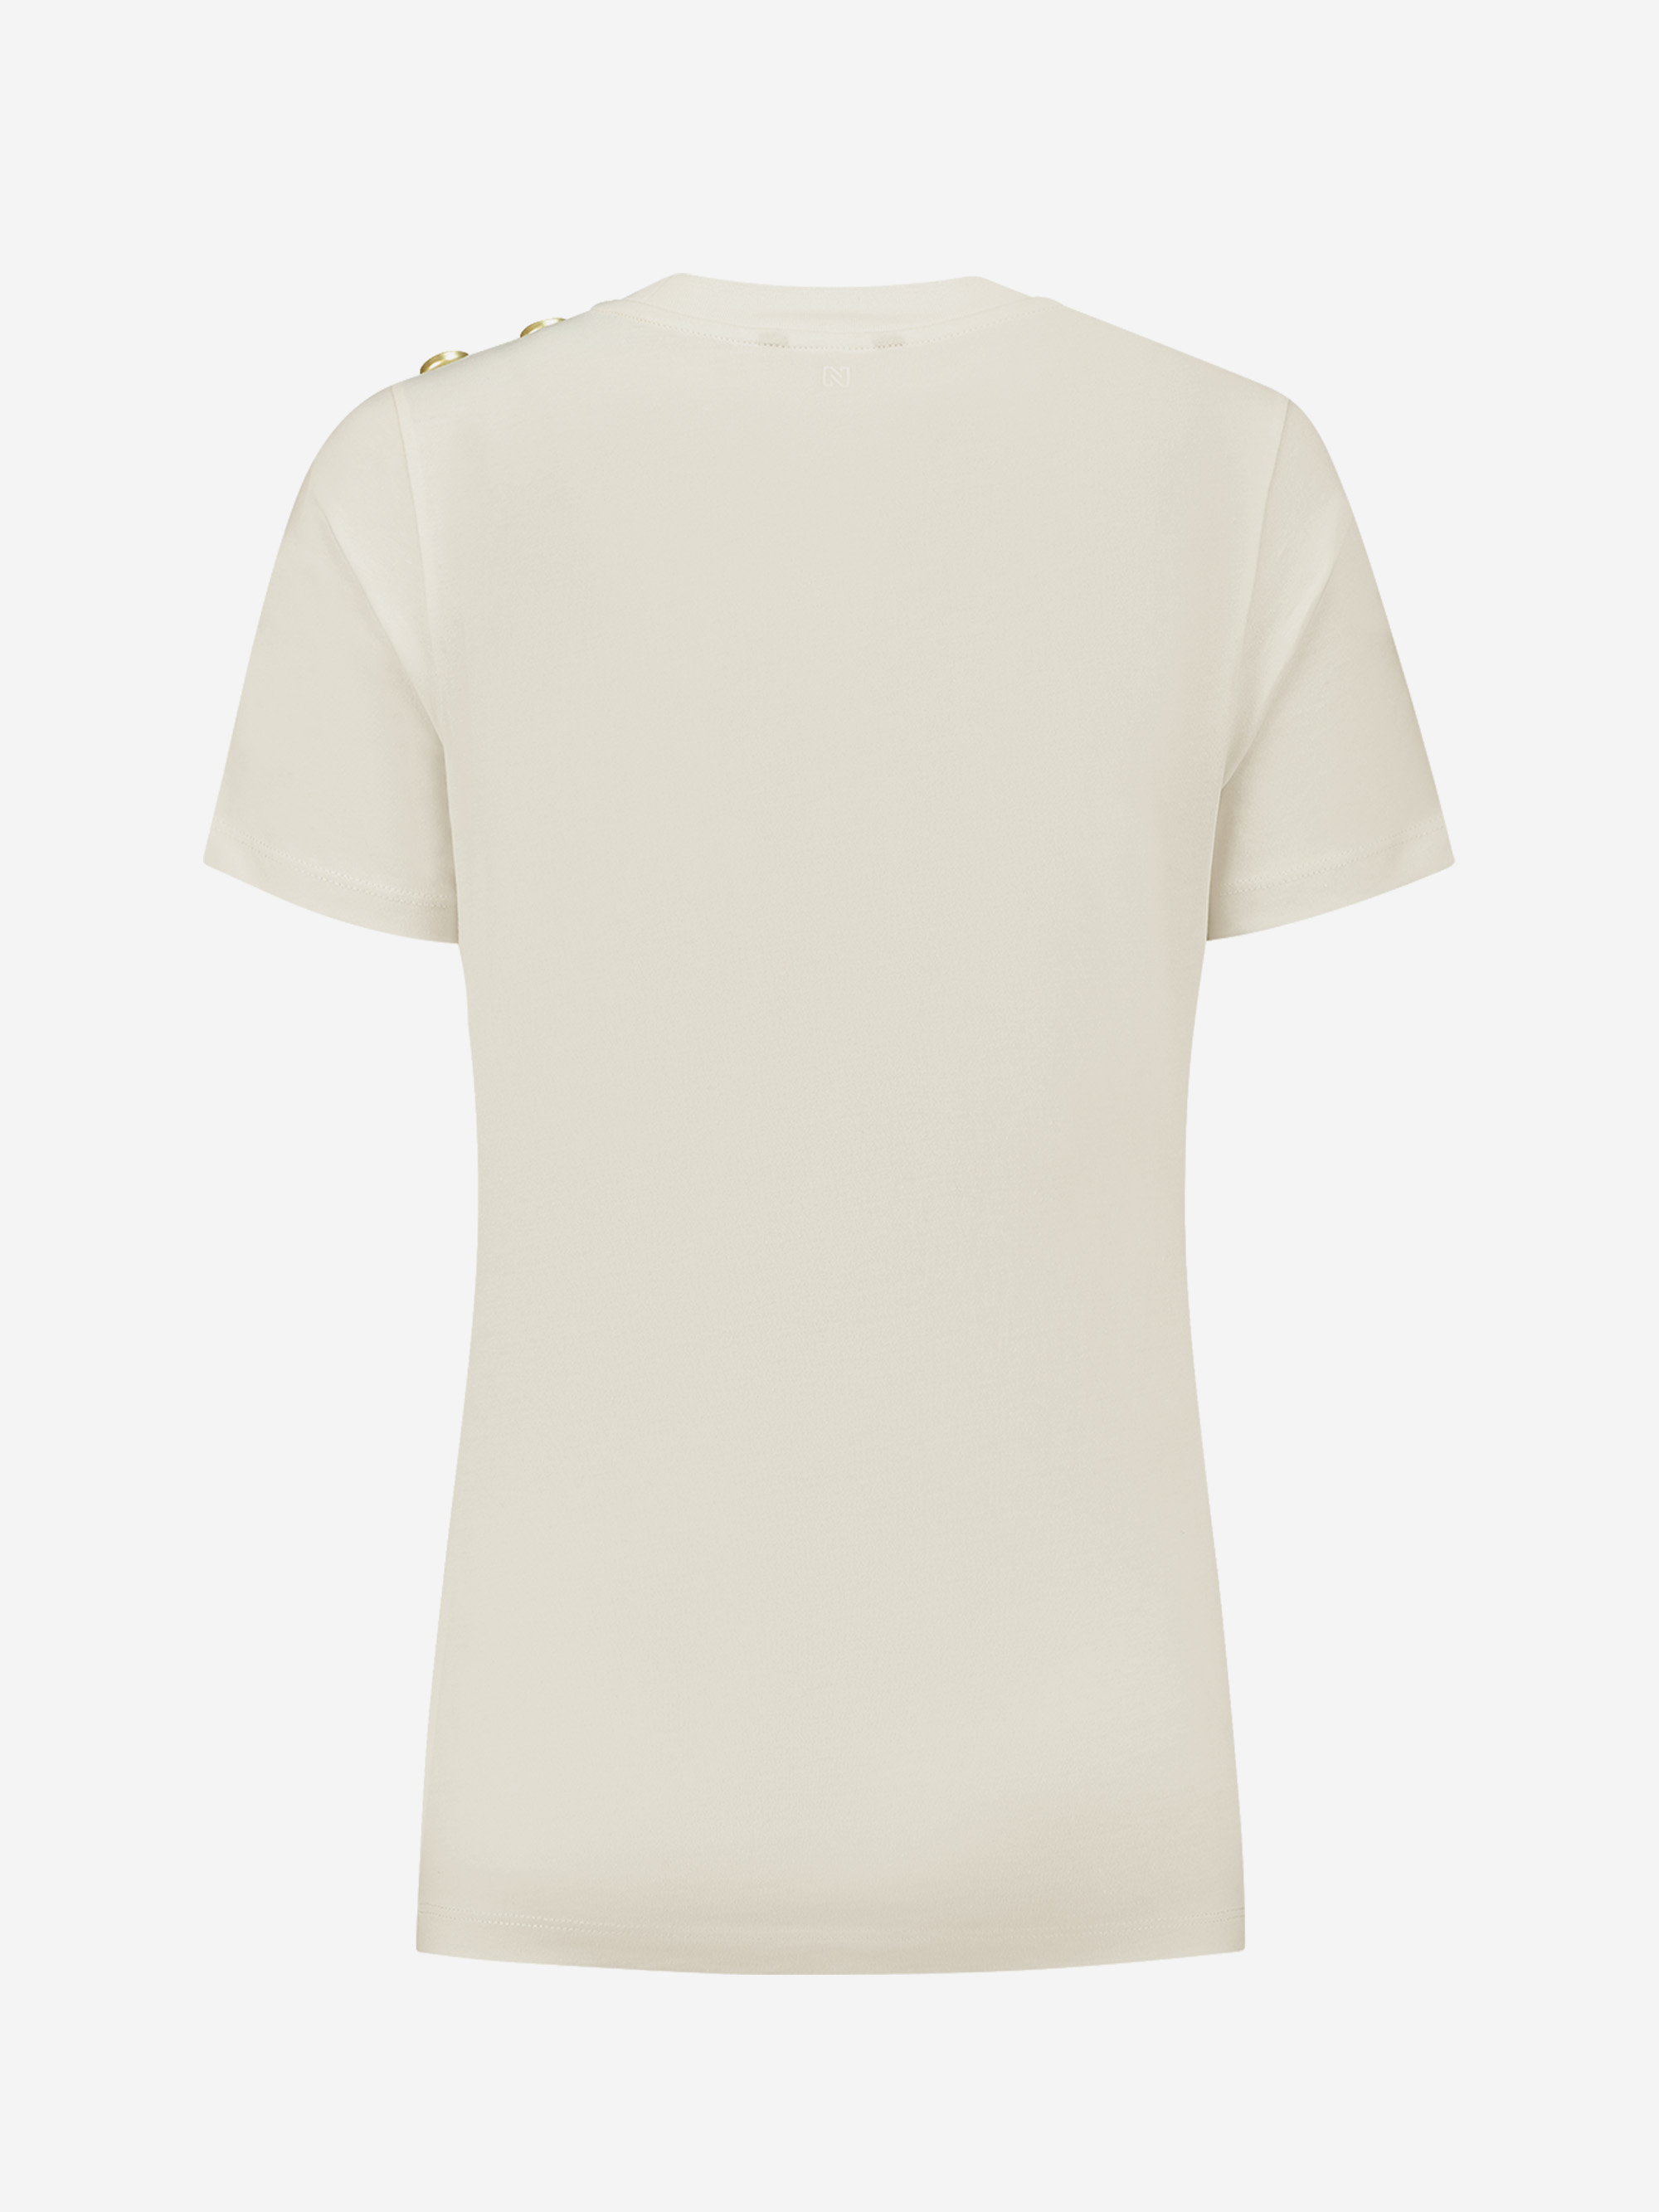 T-shirt with buttons on shoulder